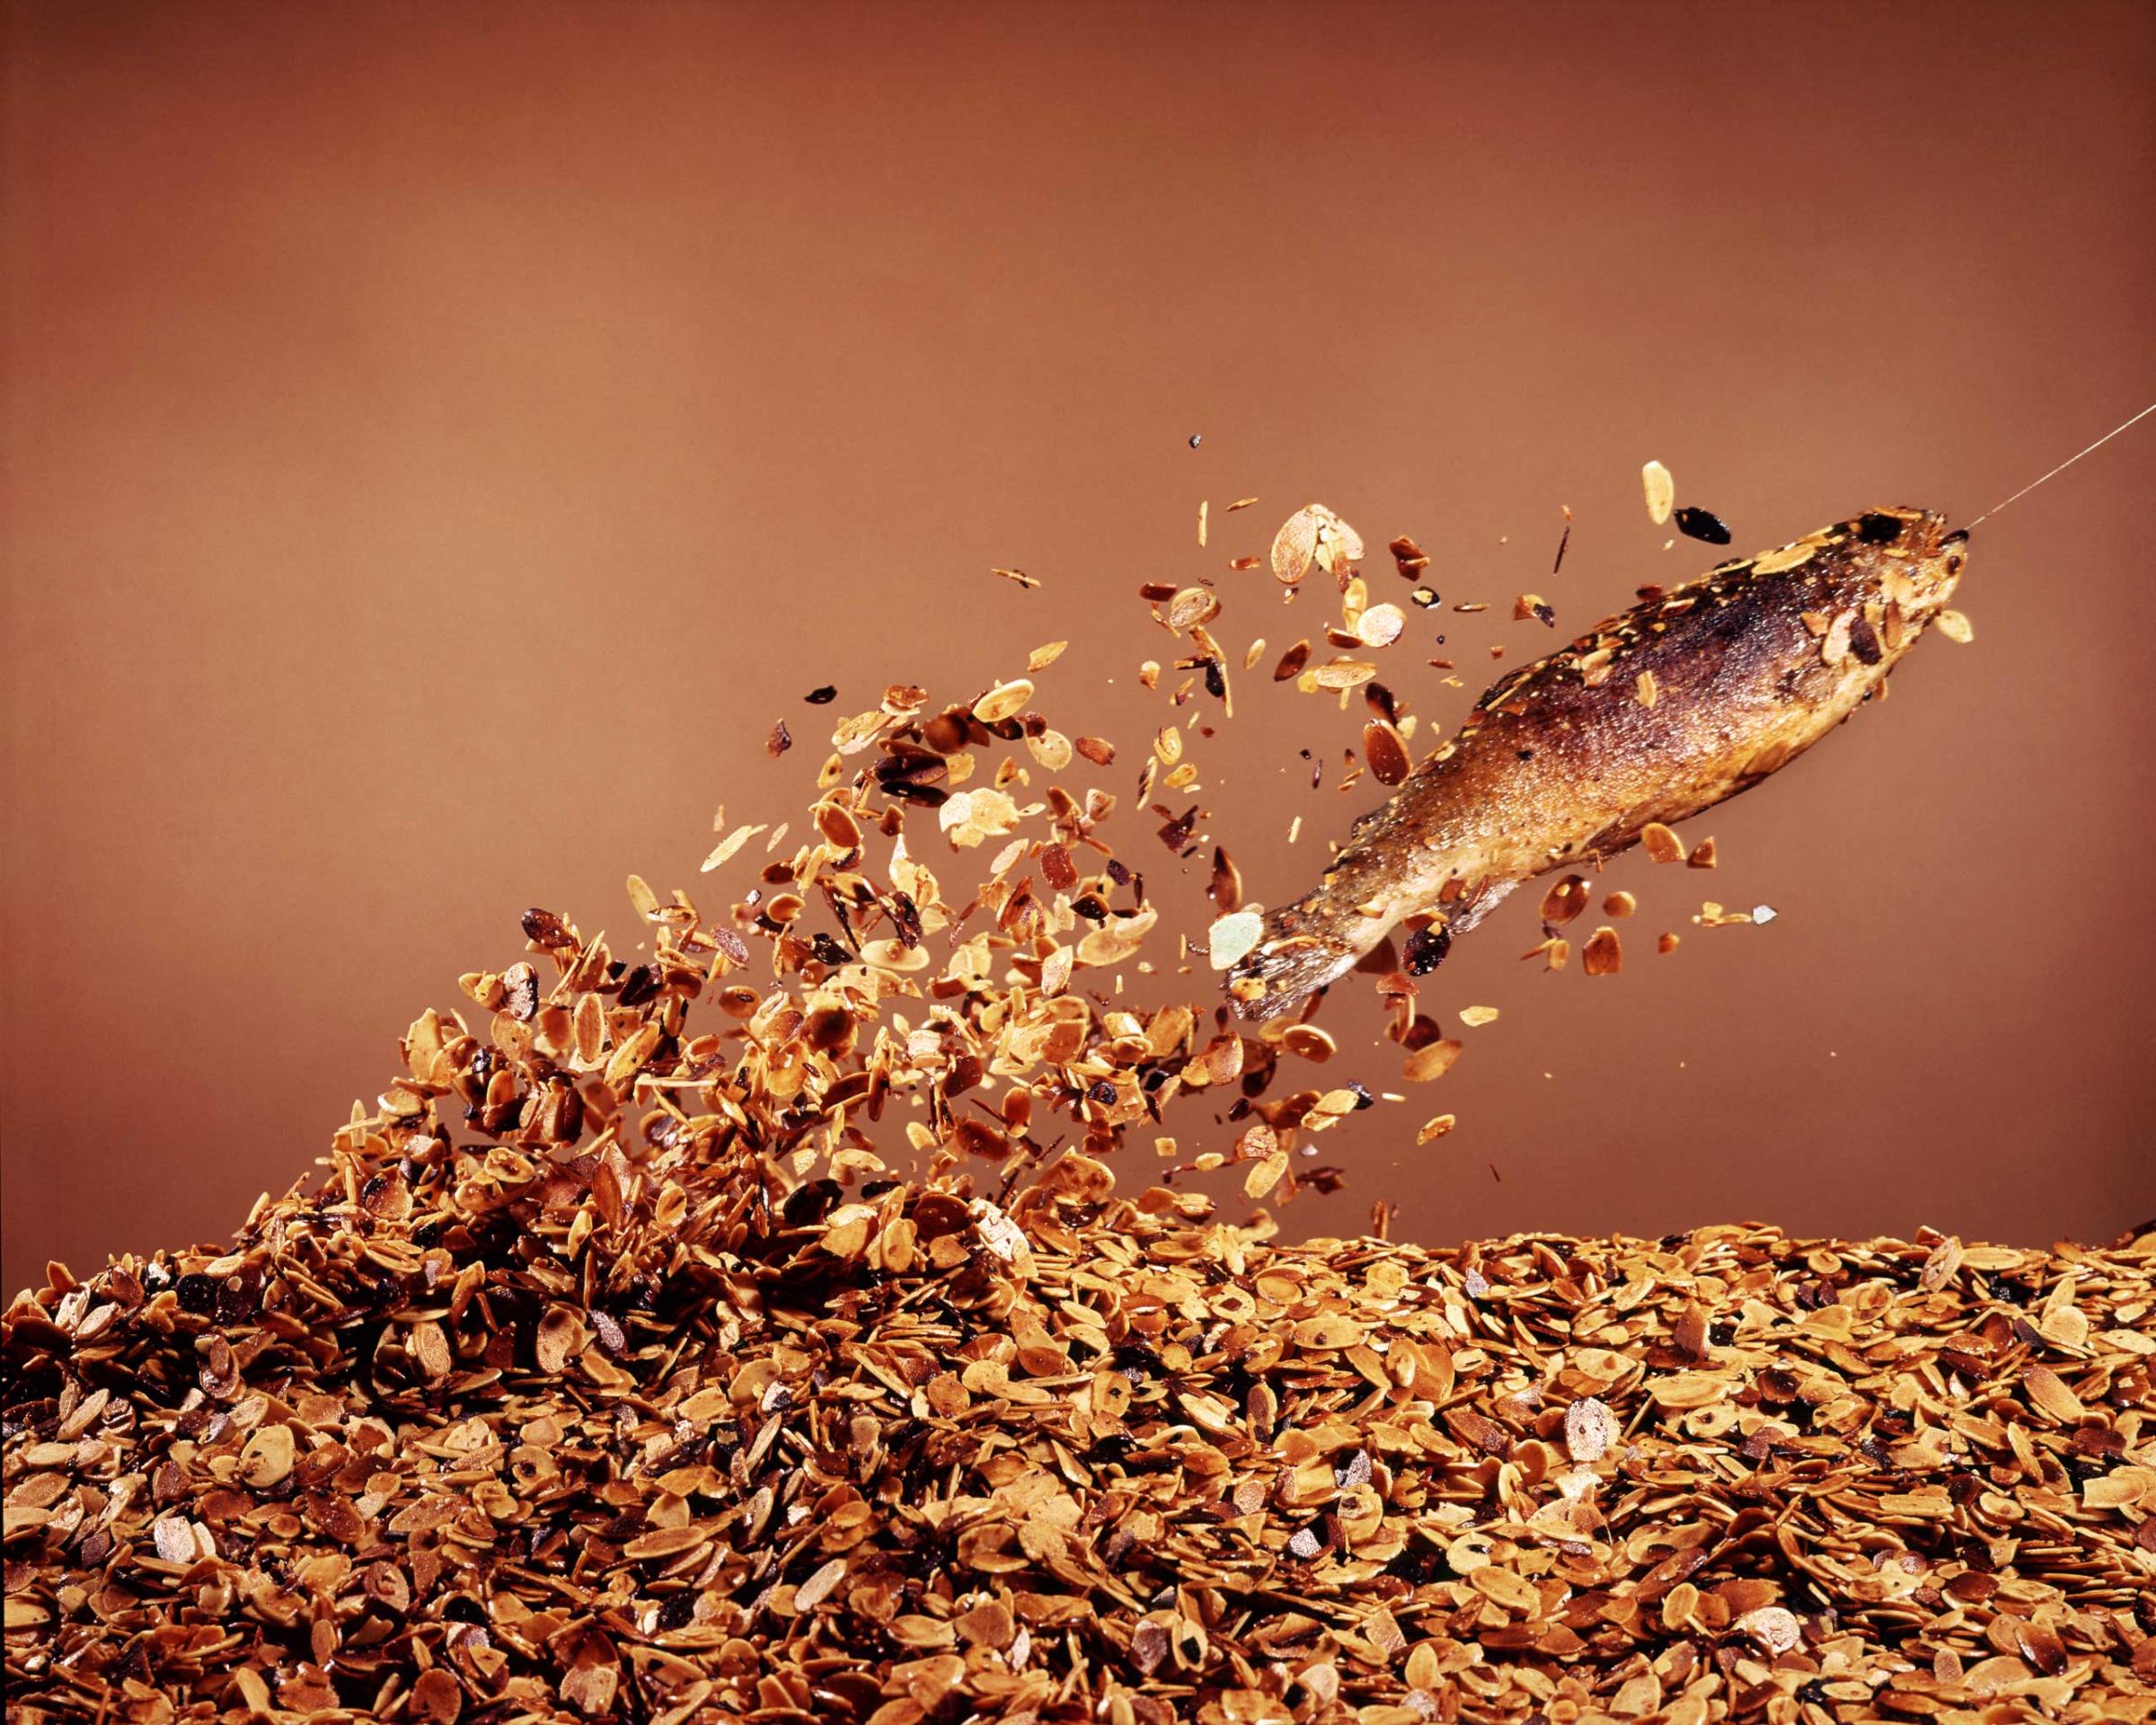 A trout "flies" out of a bed of almonds in preparation for Trout Amandine, 1964.